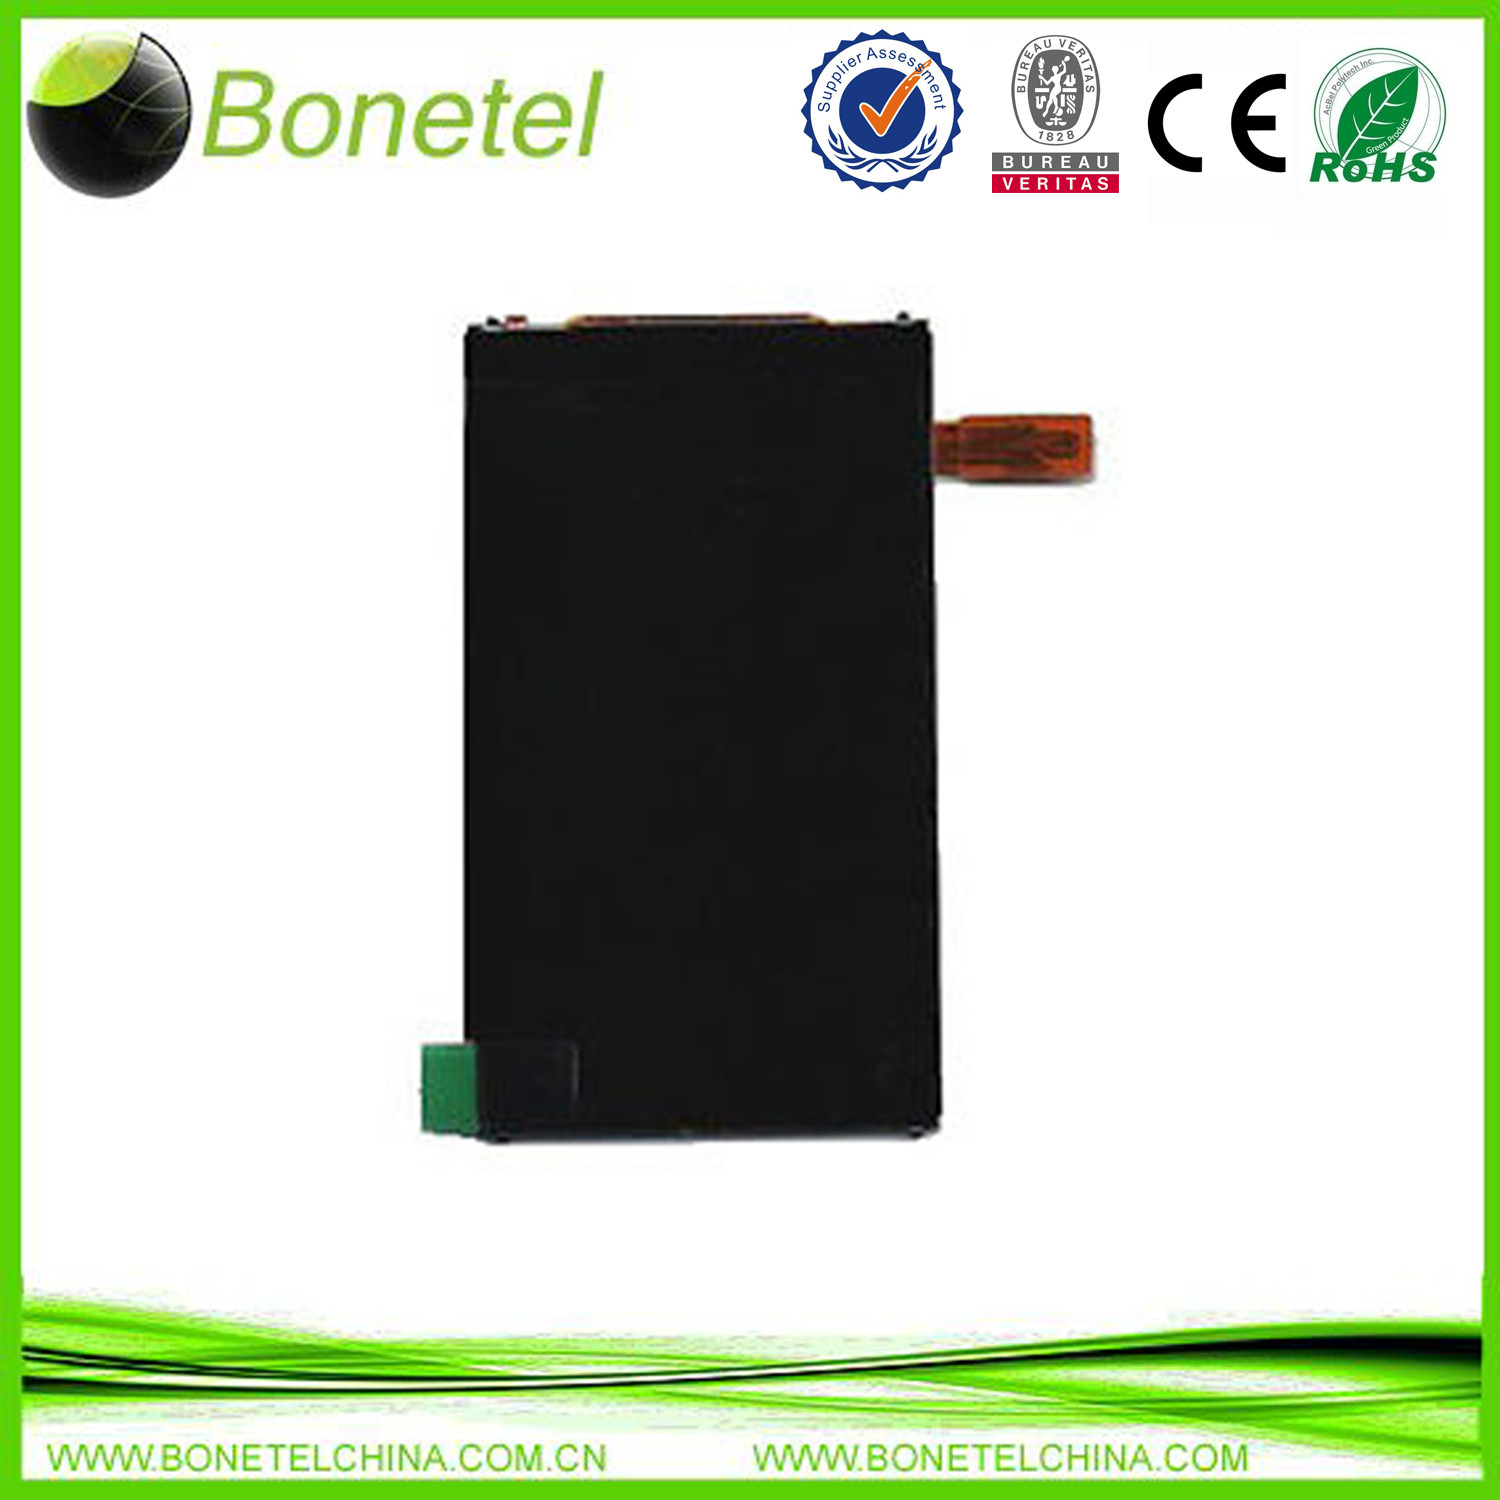 LCD for SAMSUNG WAVE 575 GT-S5750 lcd display screen